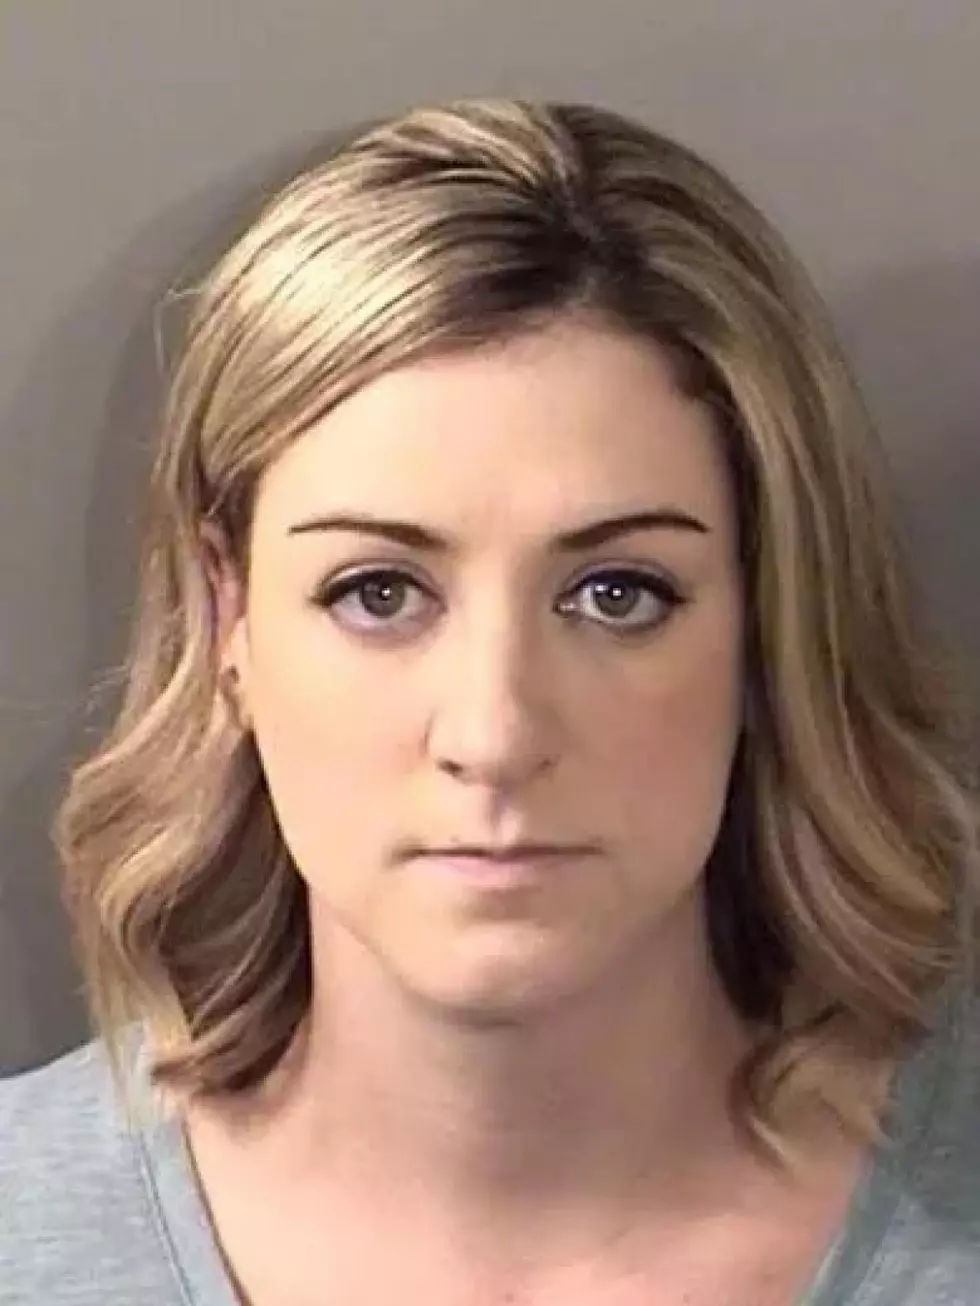 Pregnant Texas Teacher Accused Of Having Sex With 15 Year Old